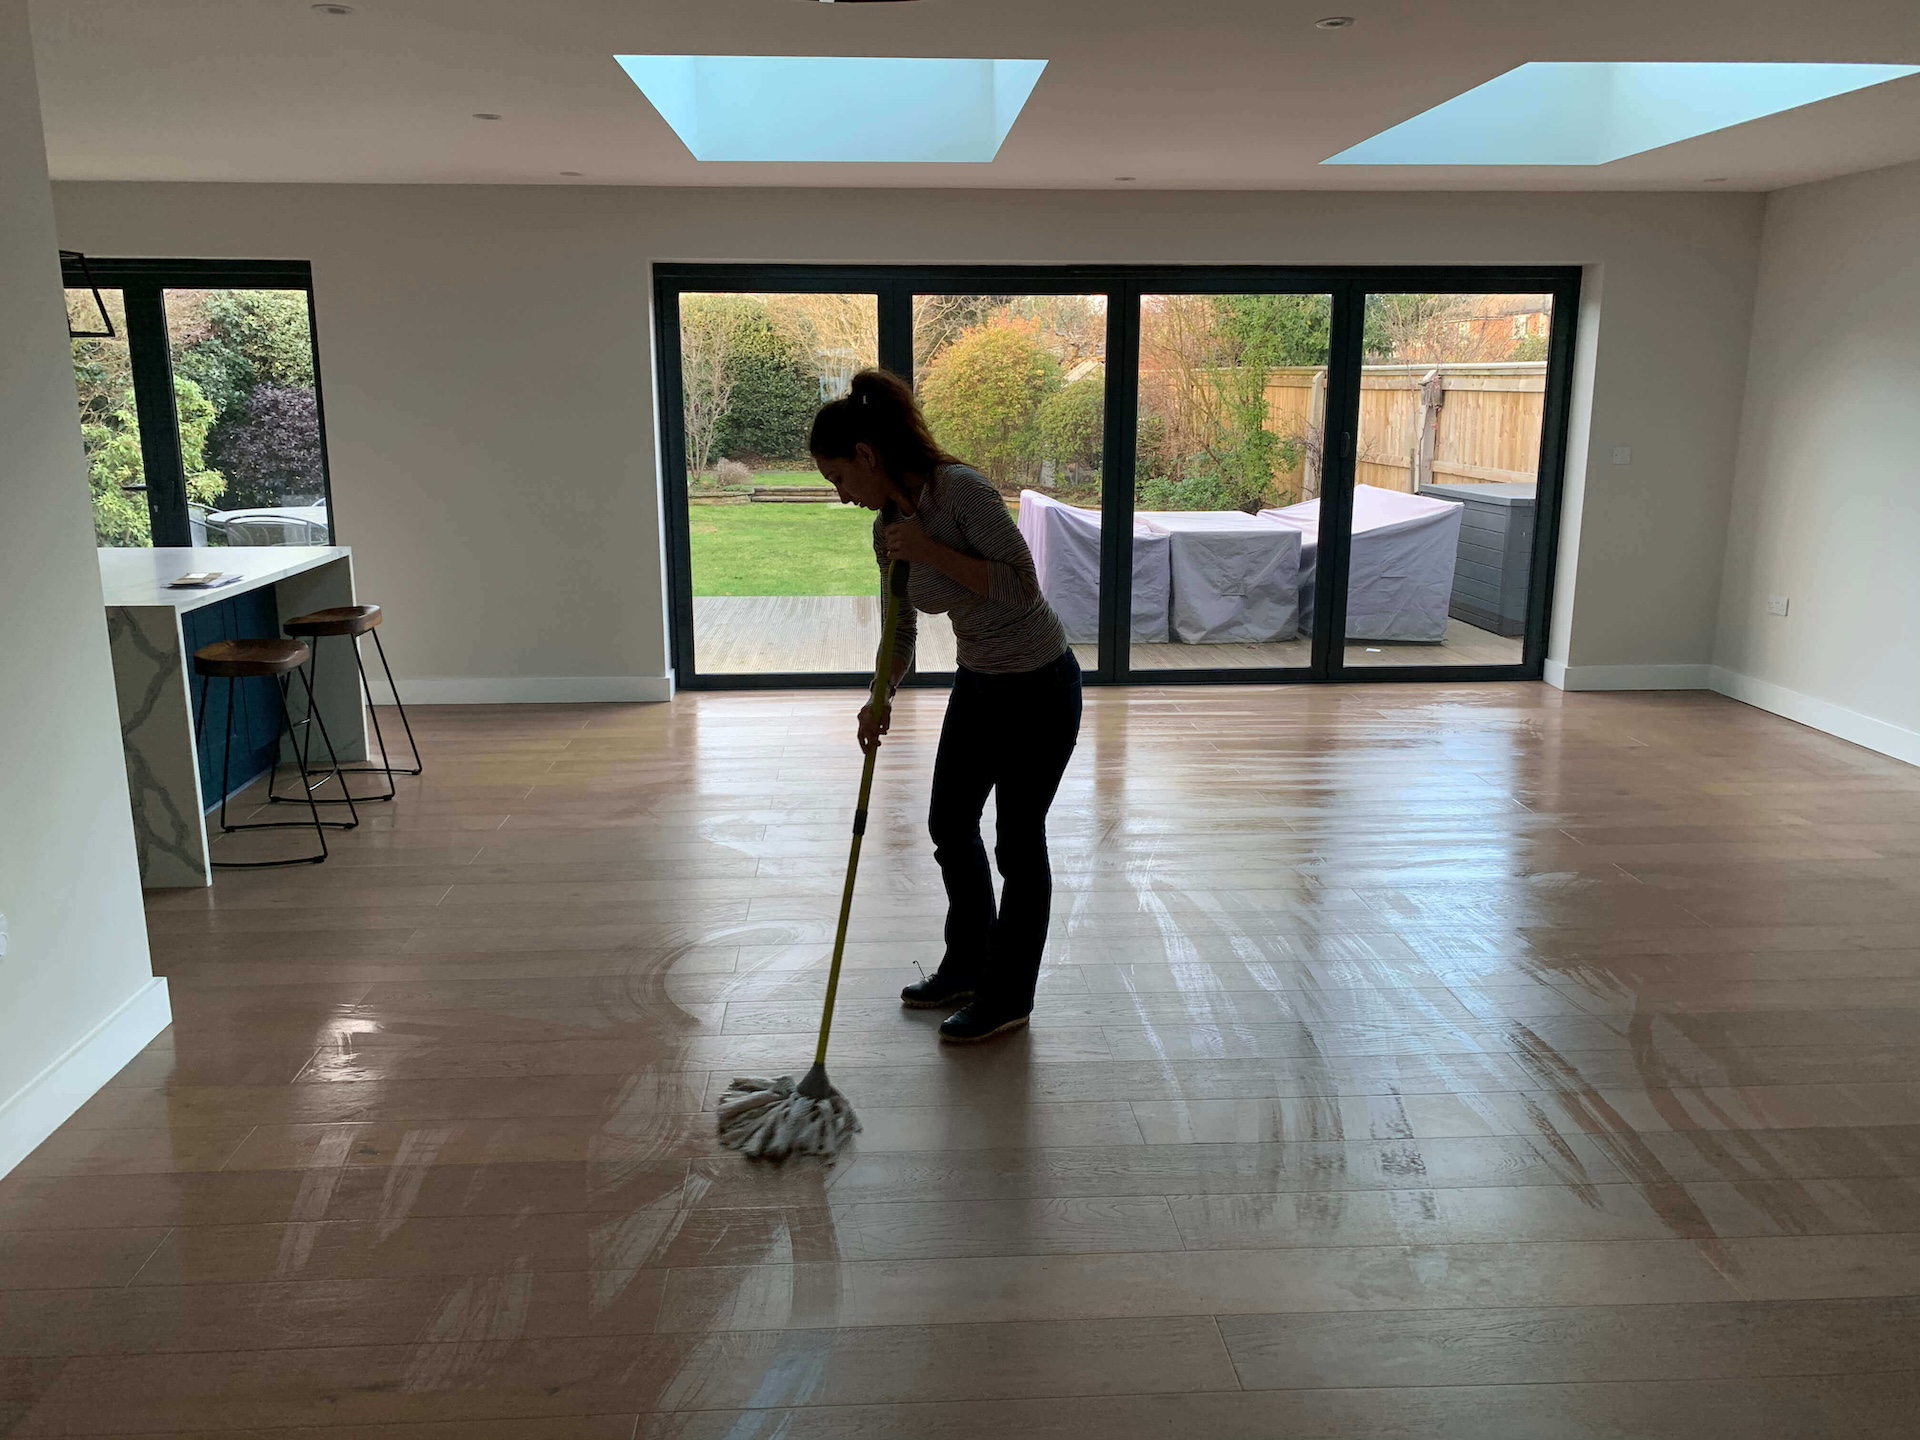 Dedicated female cleaner from Cleaningsure mopping the floor of a living room with precision during a move-out cleaning service near Wandsworth, SW18, showcasing the company's commitment to delivering spotless and welcoming spaces for the next occupants.